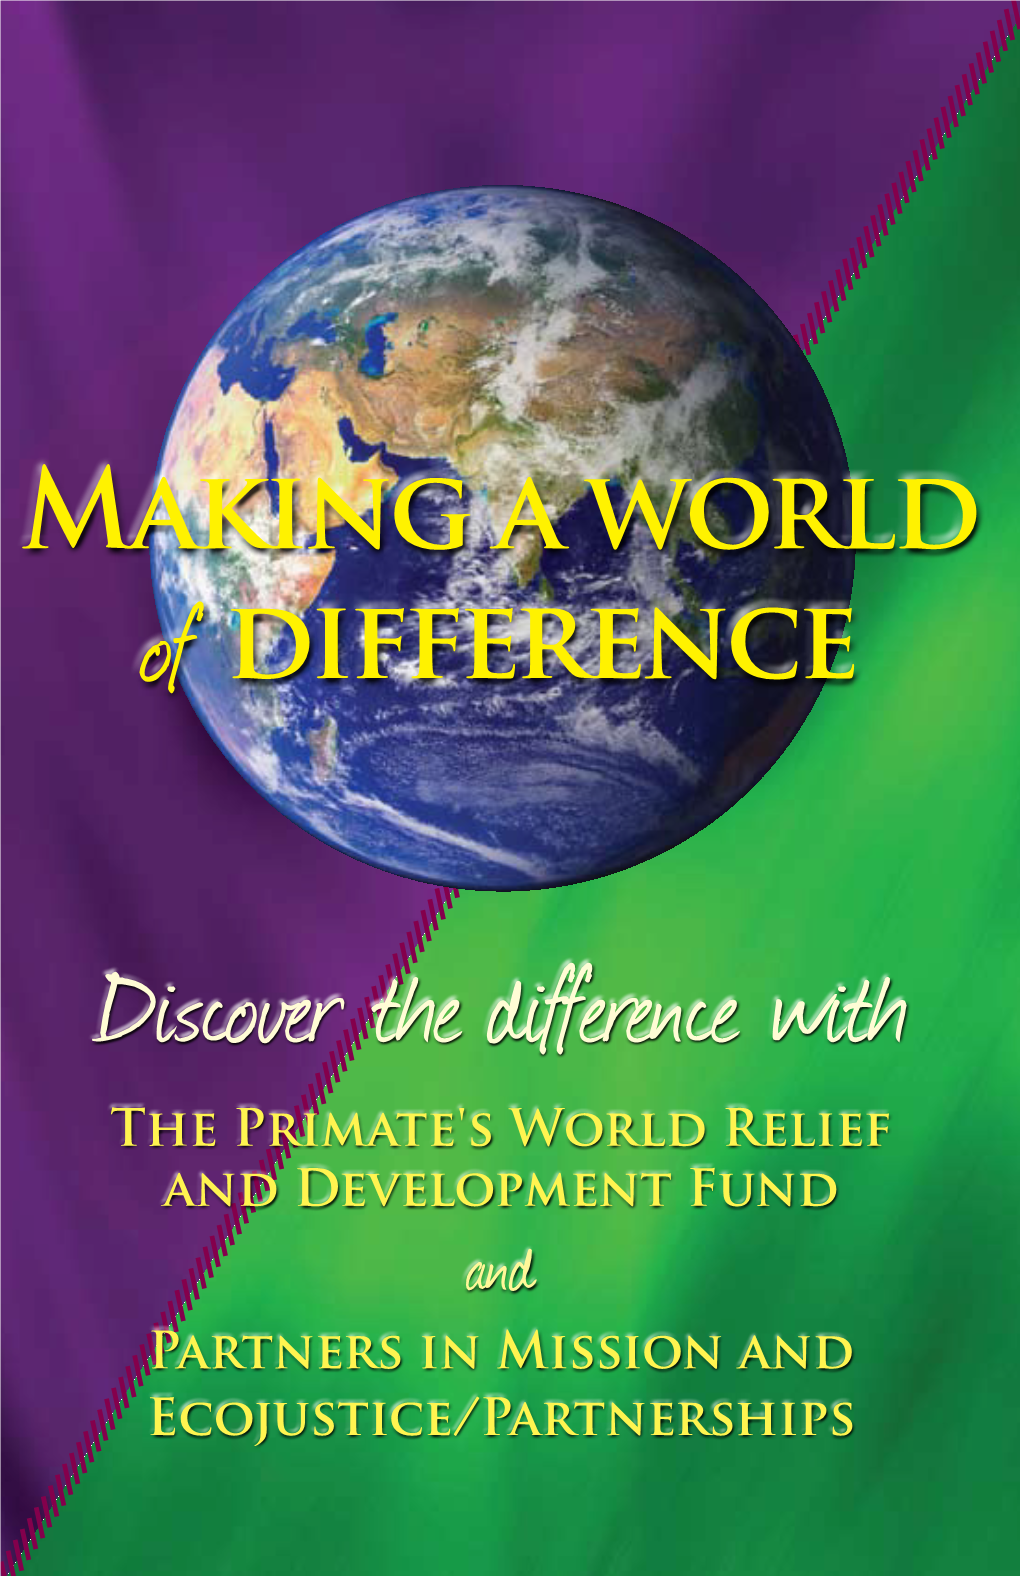 Discover the Difference with the Primate's World Relief and Development Fund and Partners in Mission and Ecojustice/Partnerships